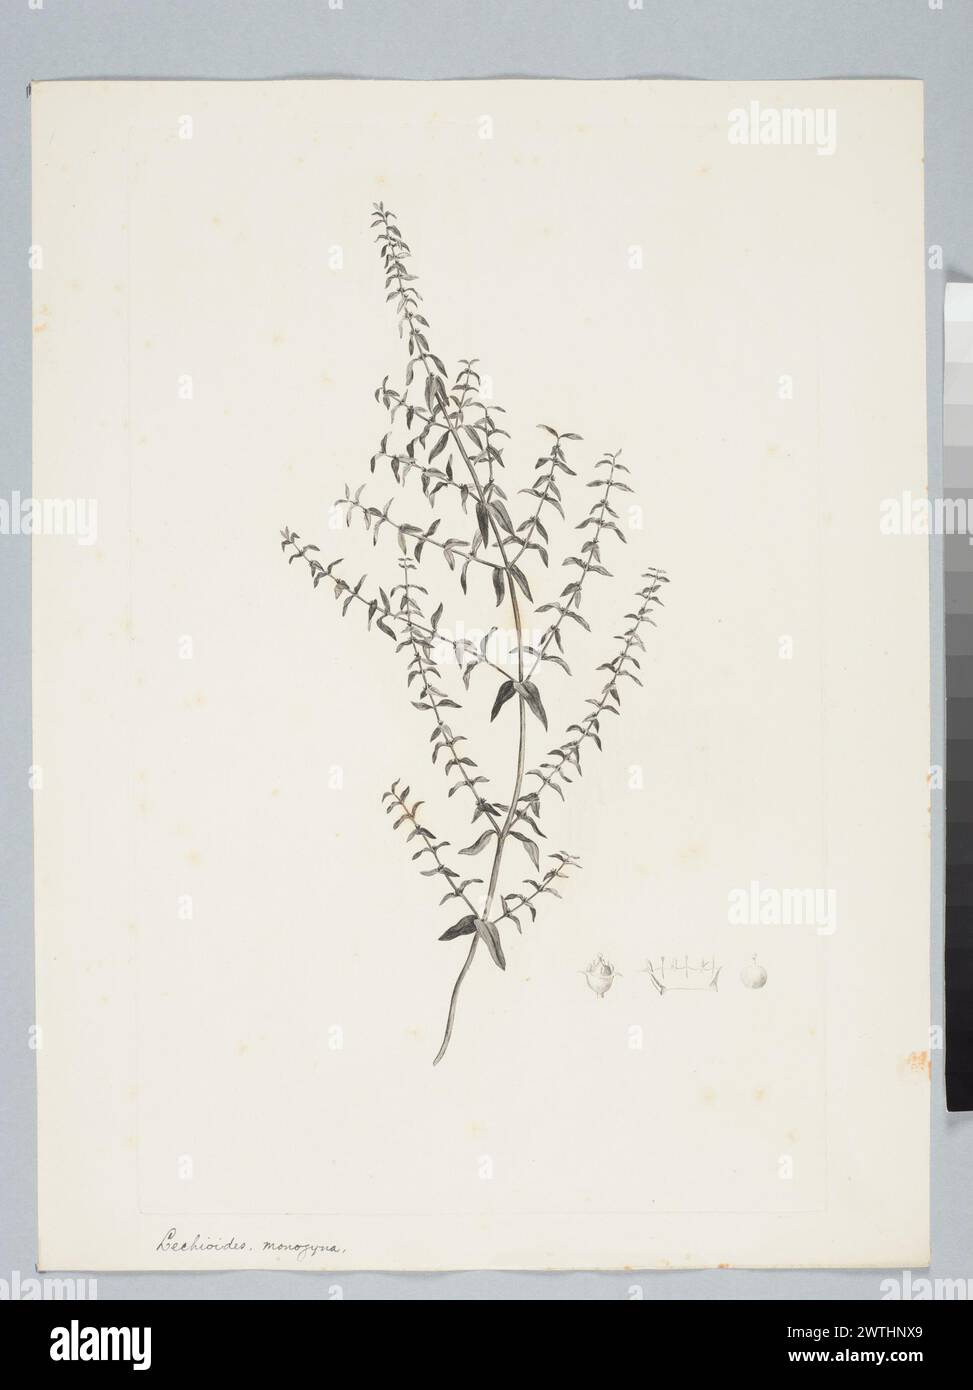 Rotala densiflora (Roth ex Roemer & Schultes) Koehne prints, copper engravings, line engravings Stock Photo